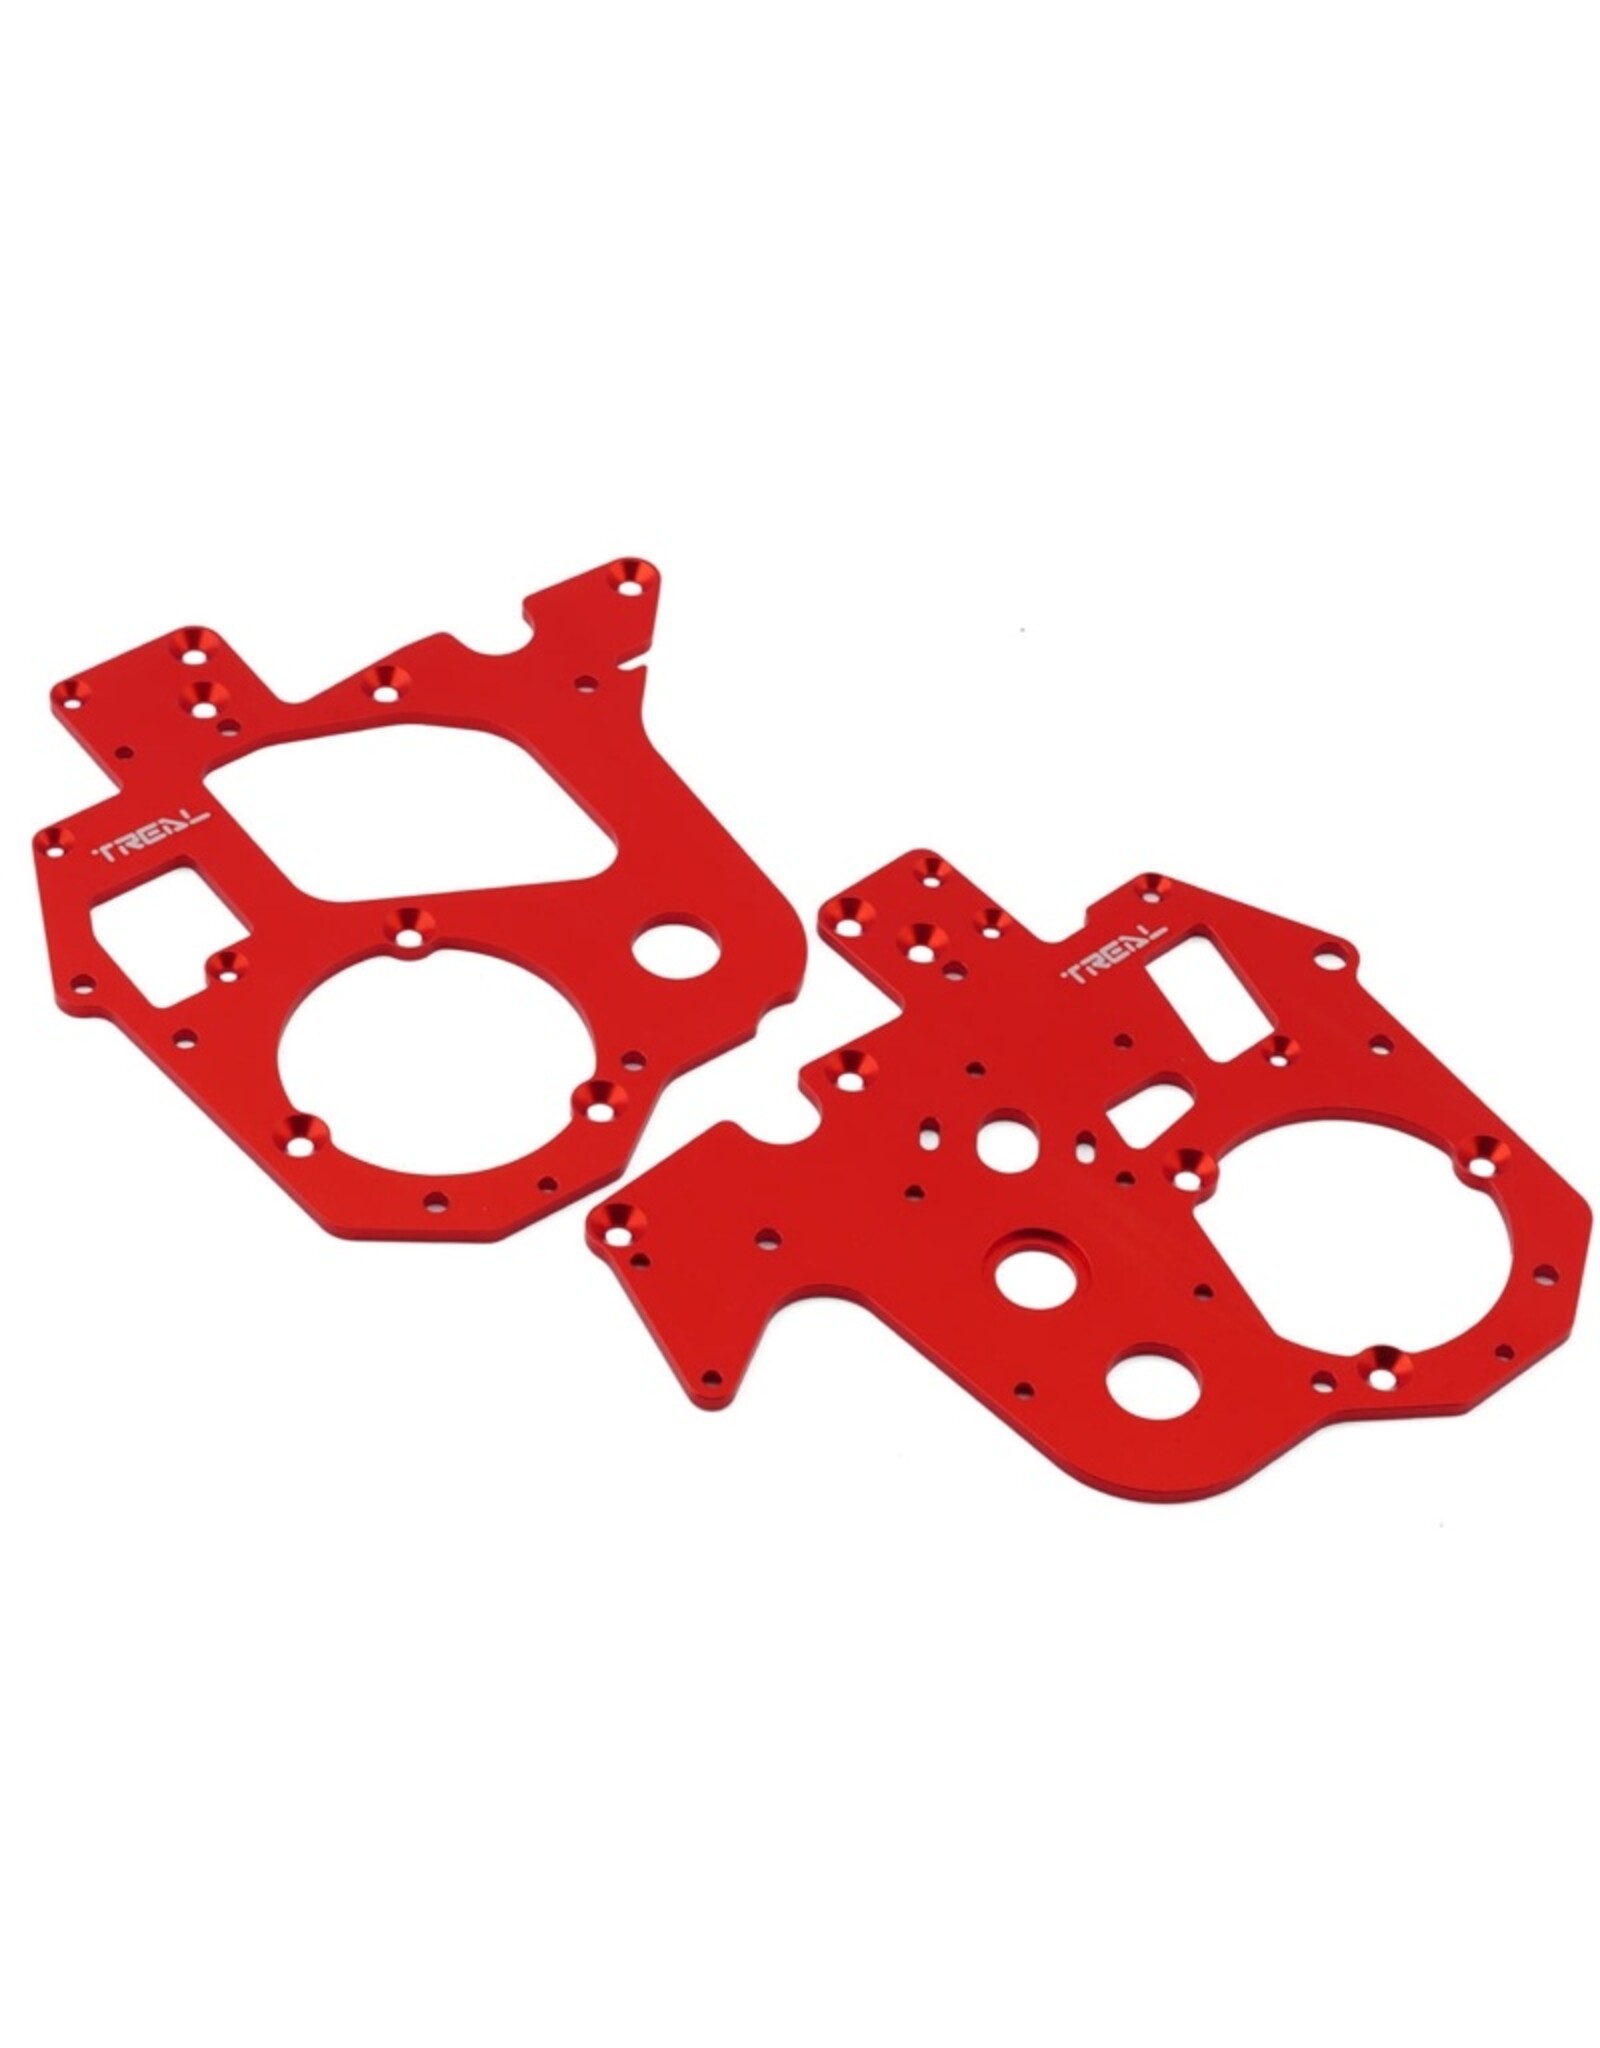 treal TLHTPROMOTOMX-160 Promoto MX Aluminum Chassis Plates (Red) (2)